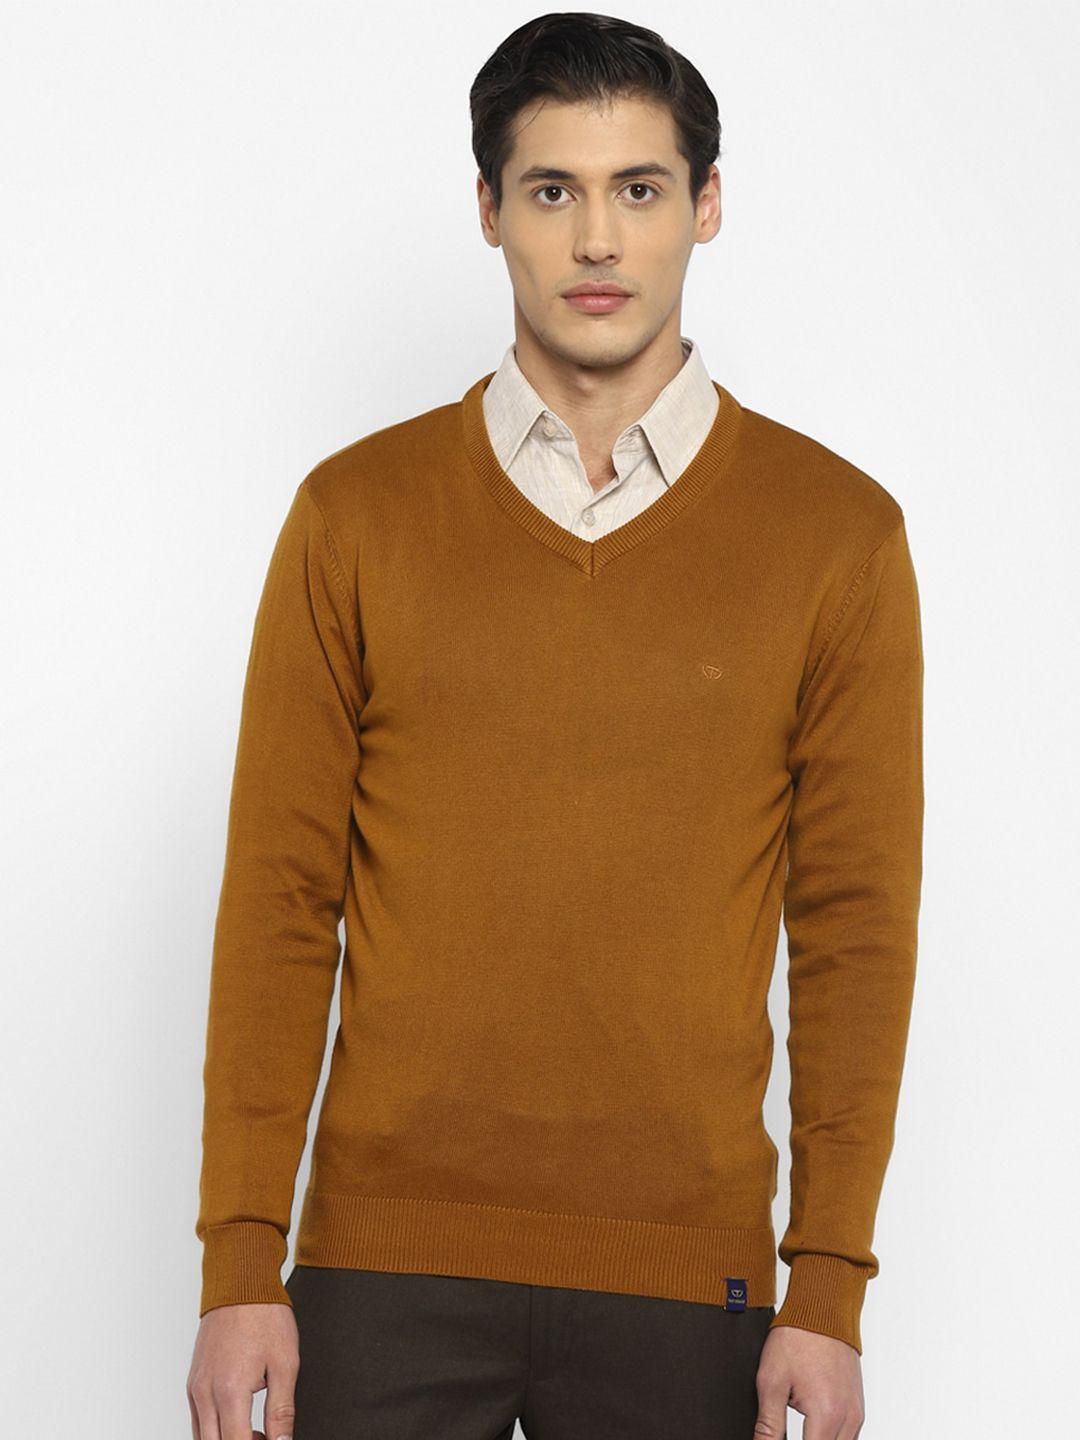 top brass  v-neck wool pullover sweater